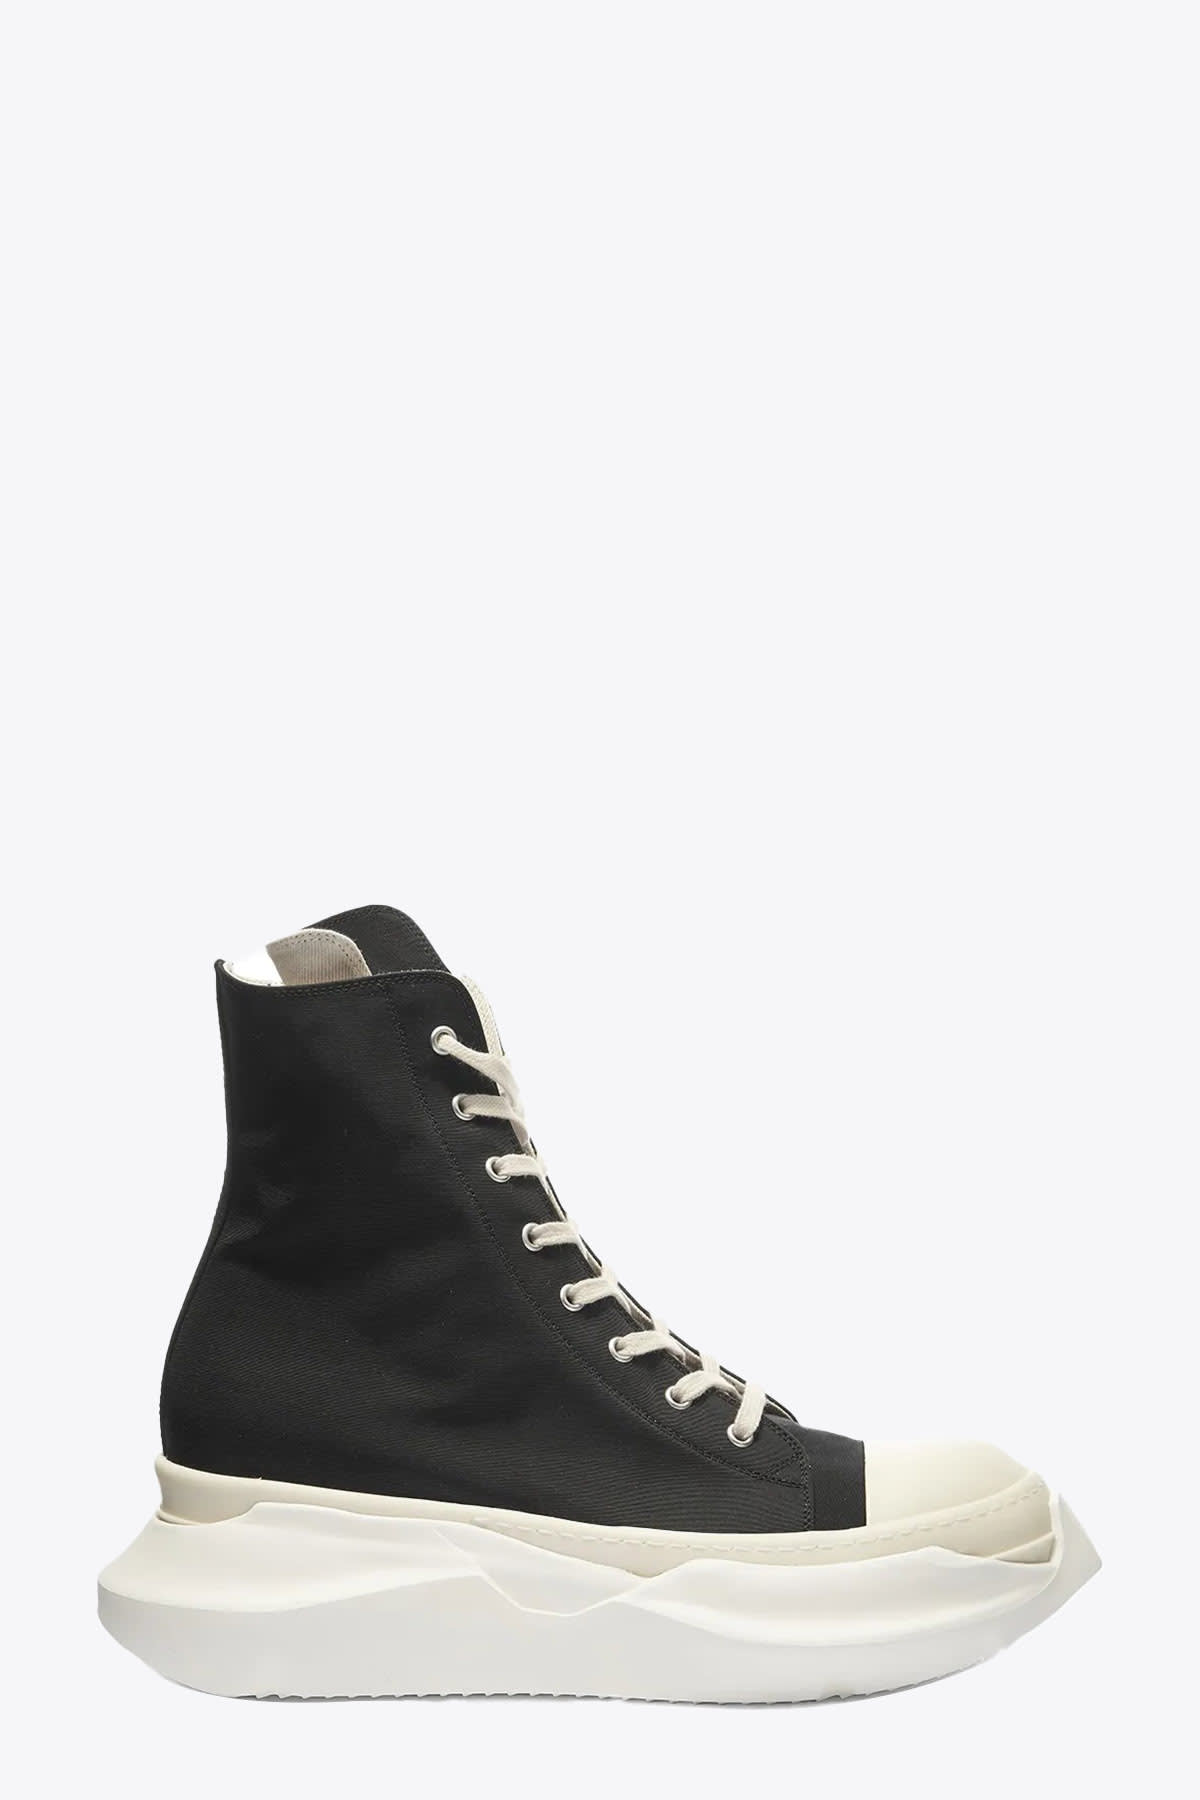 DRKSHDW Abstract Black nylon hi-top sneaker - abstract